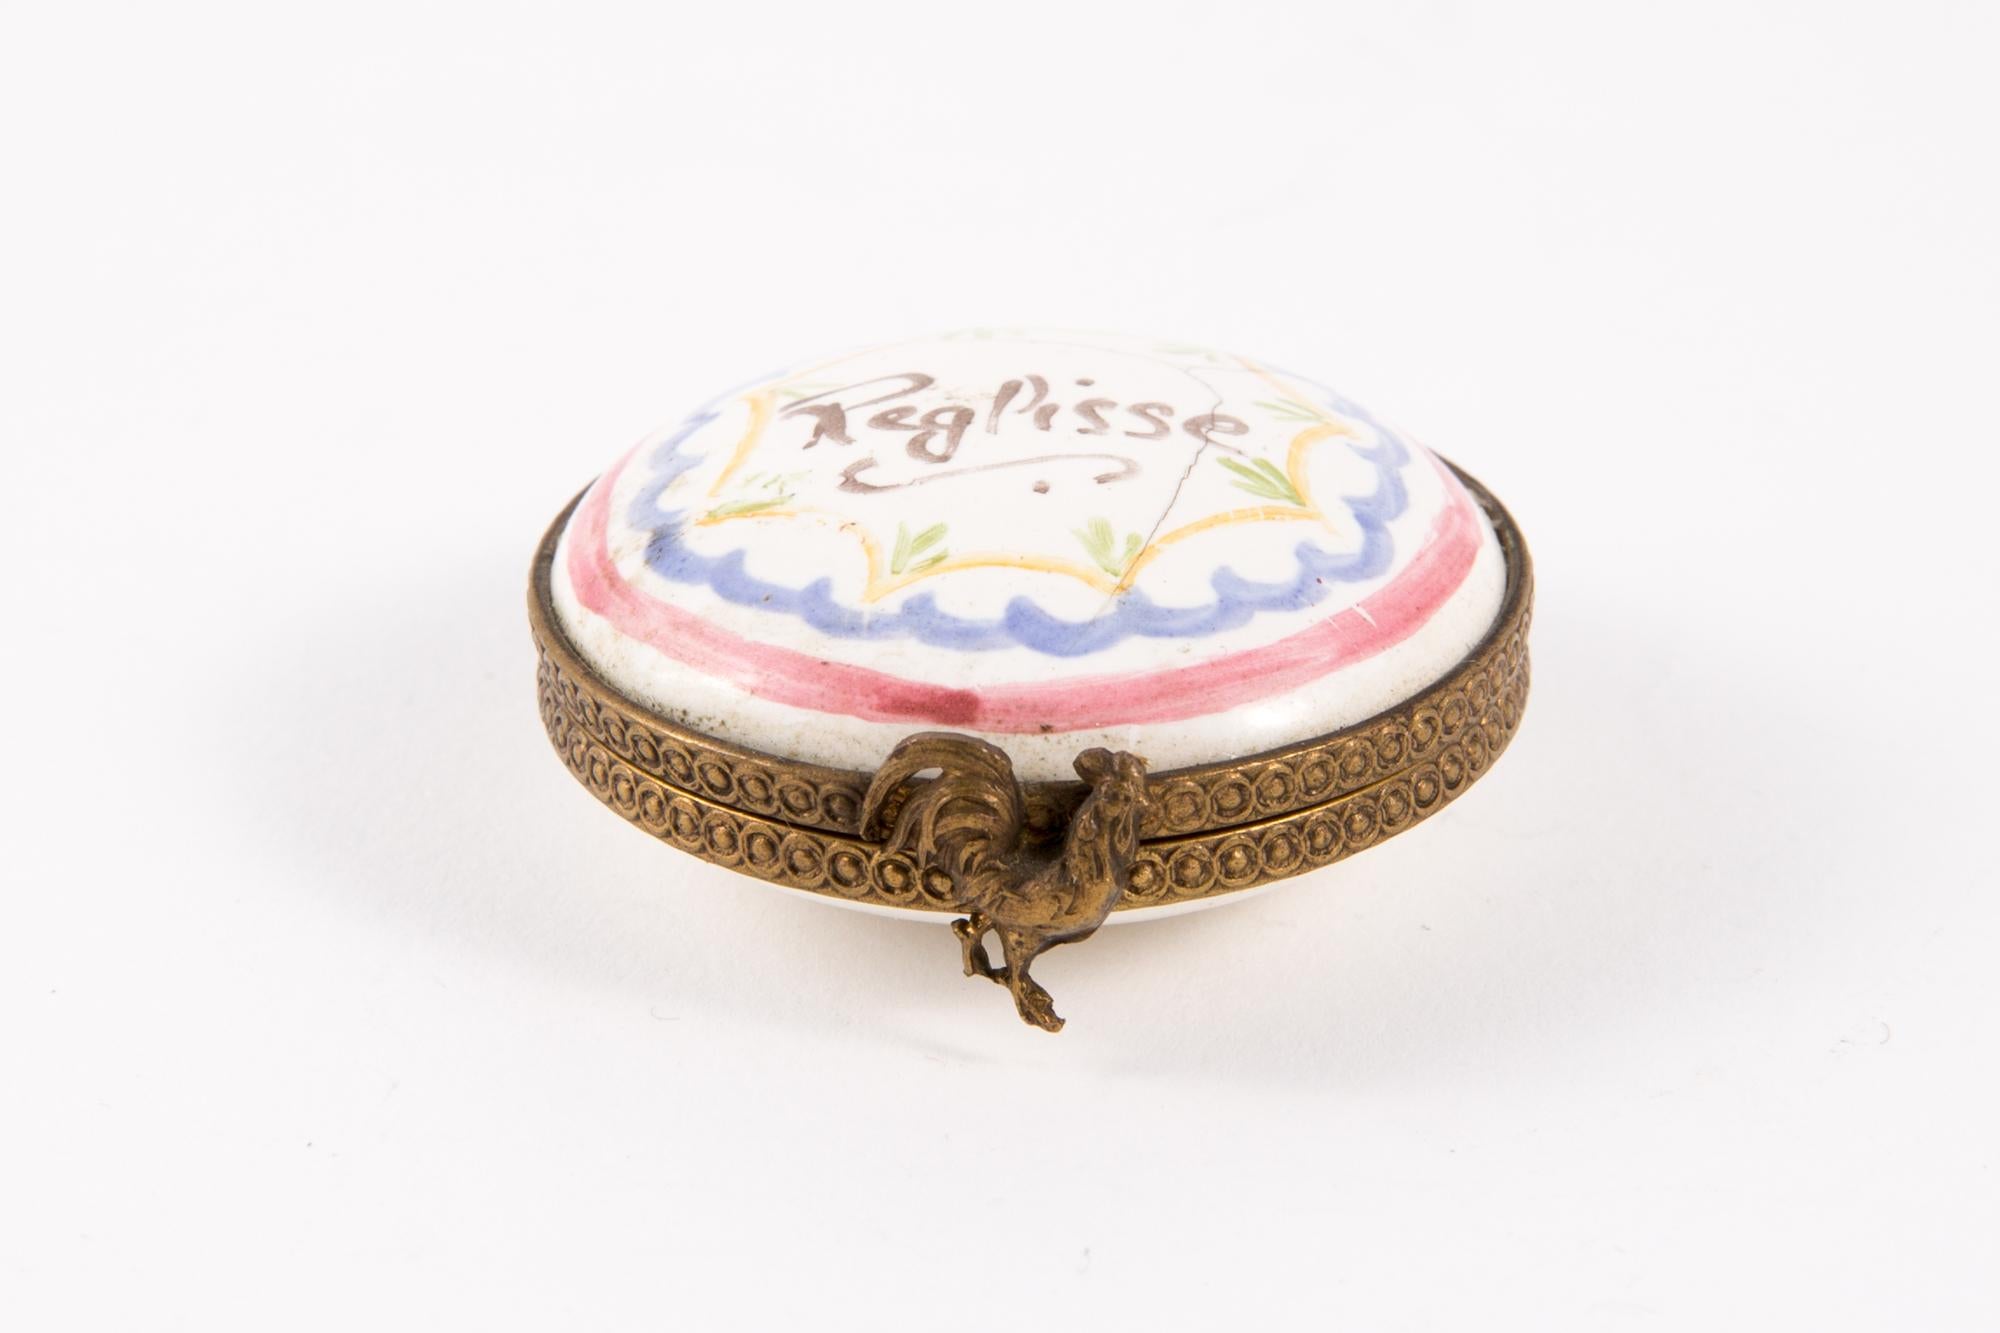 Porcelain Reglisse: Licorice (soft extract) polychrome round pill box featuring a metal frame, a flower claps, leaves painted inside and a polychrome floral decor and text. 
Hand Painted
In good vintage condition. 
Diameter 1.5in. (4cm)
Width 0.6in